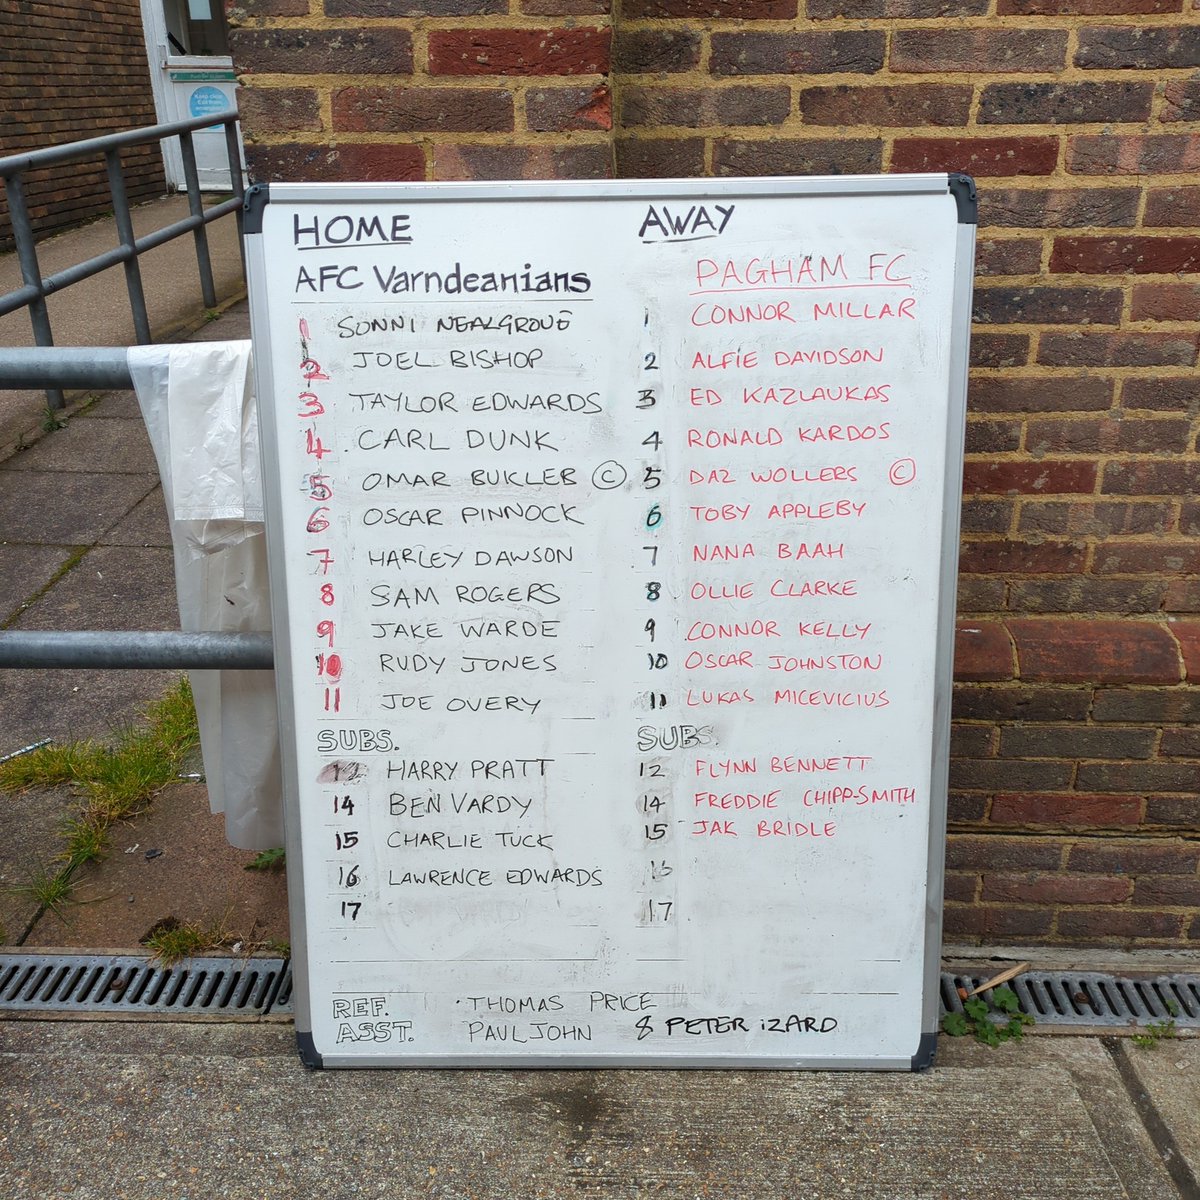 Teams for today's game #vgulls